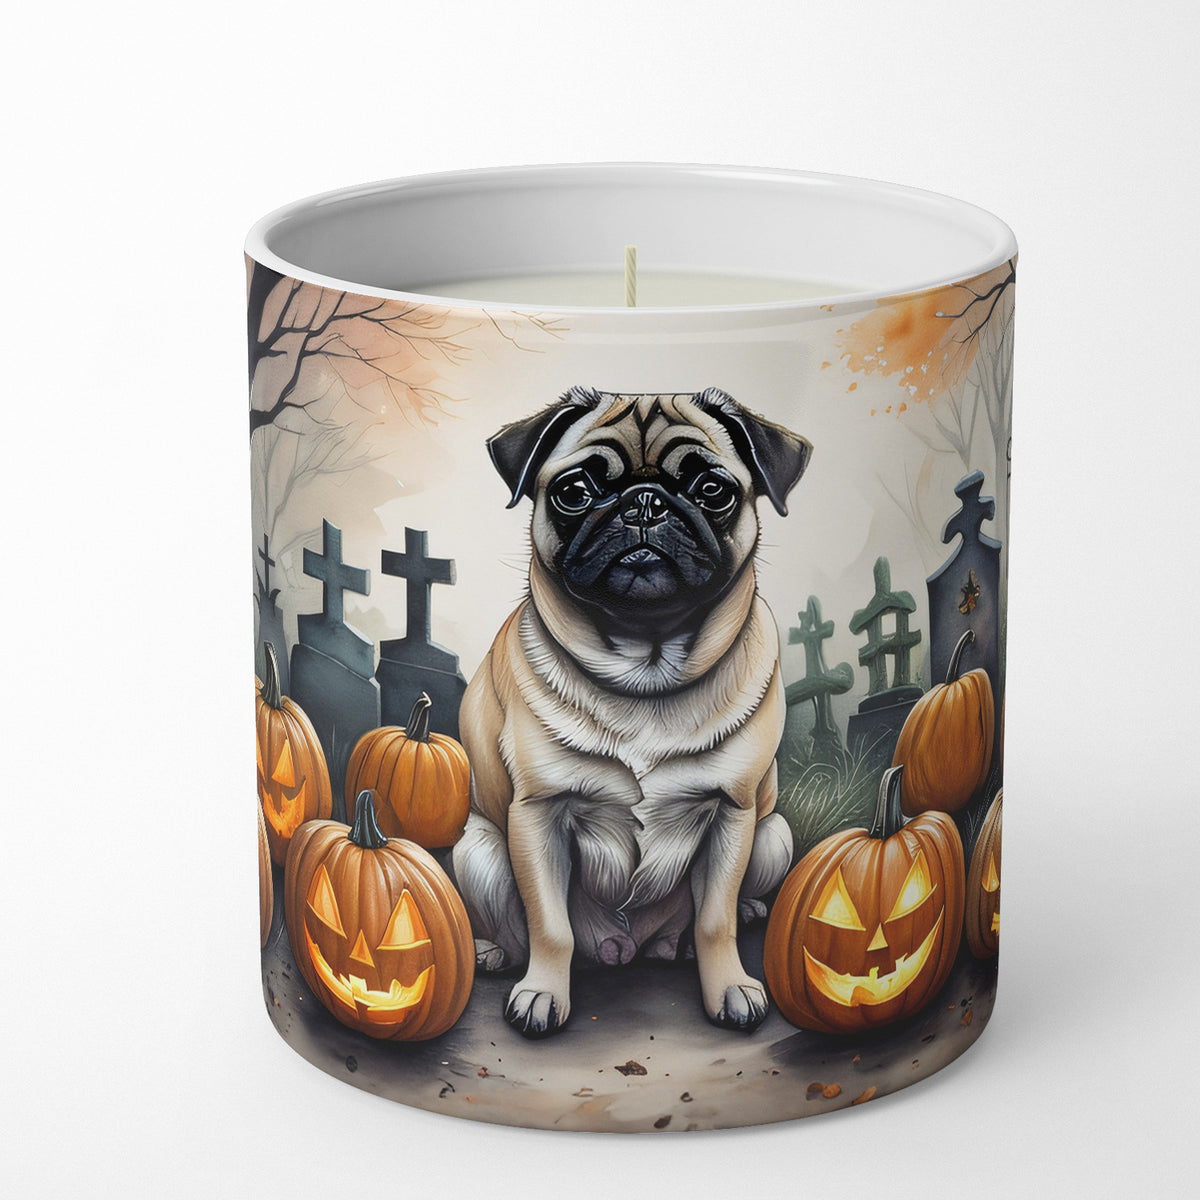 Buy this Fawn Pug Spooky Halloween Decorative Soy Candle